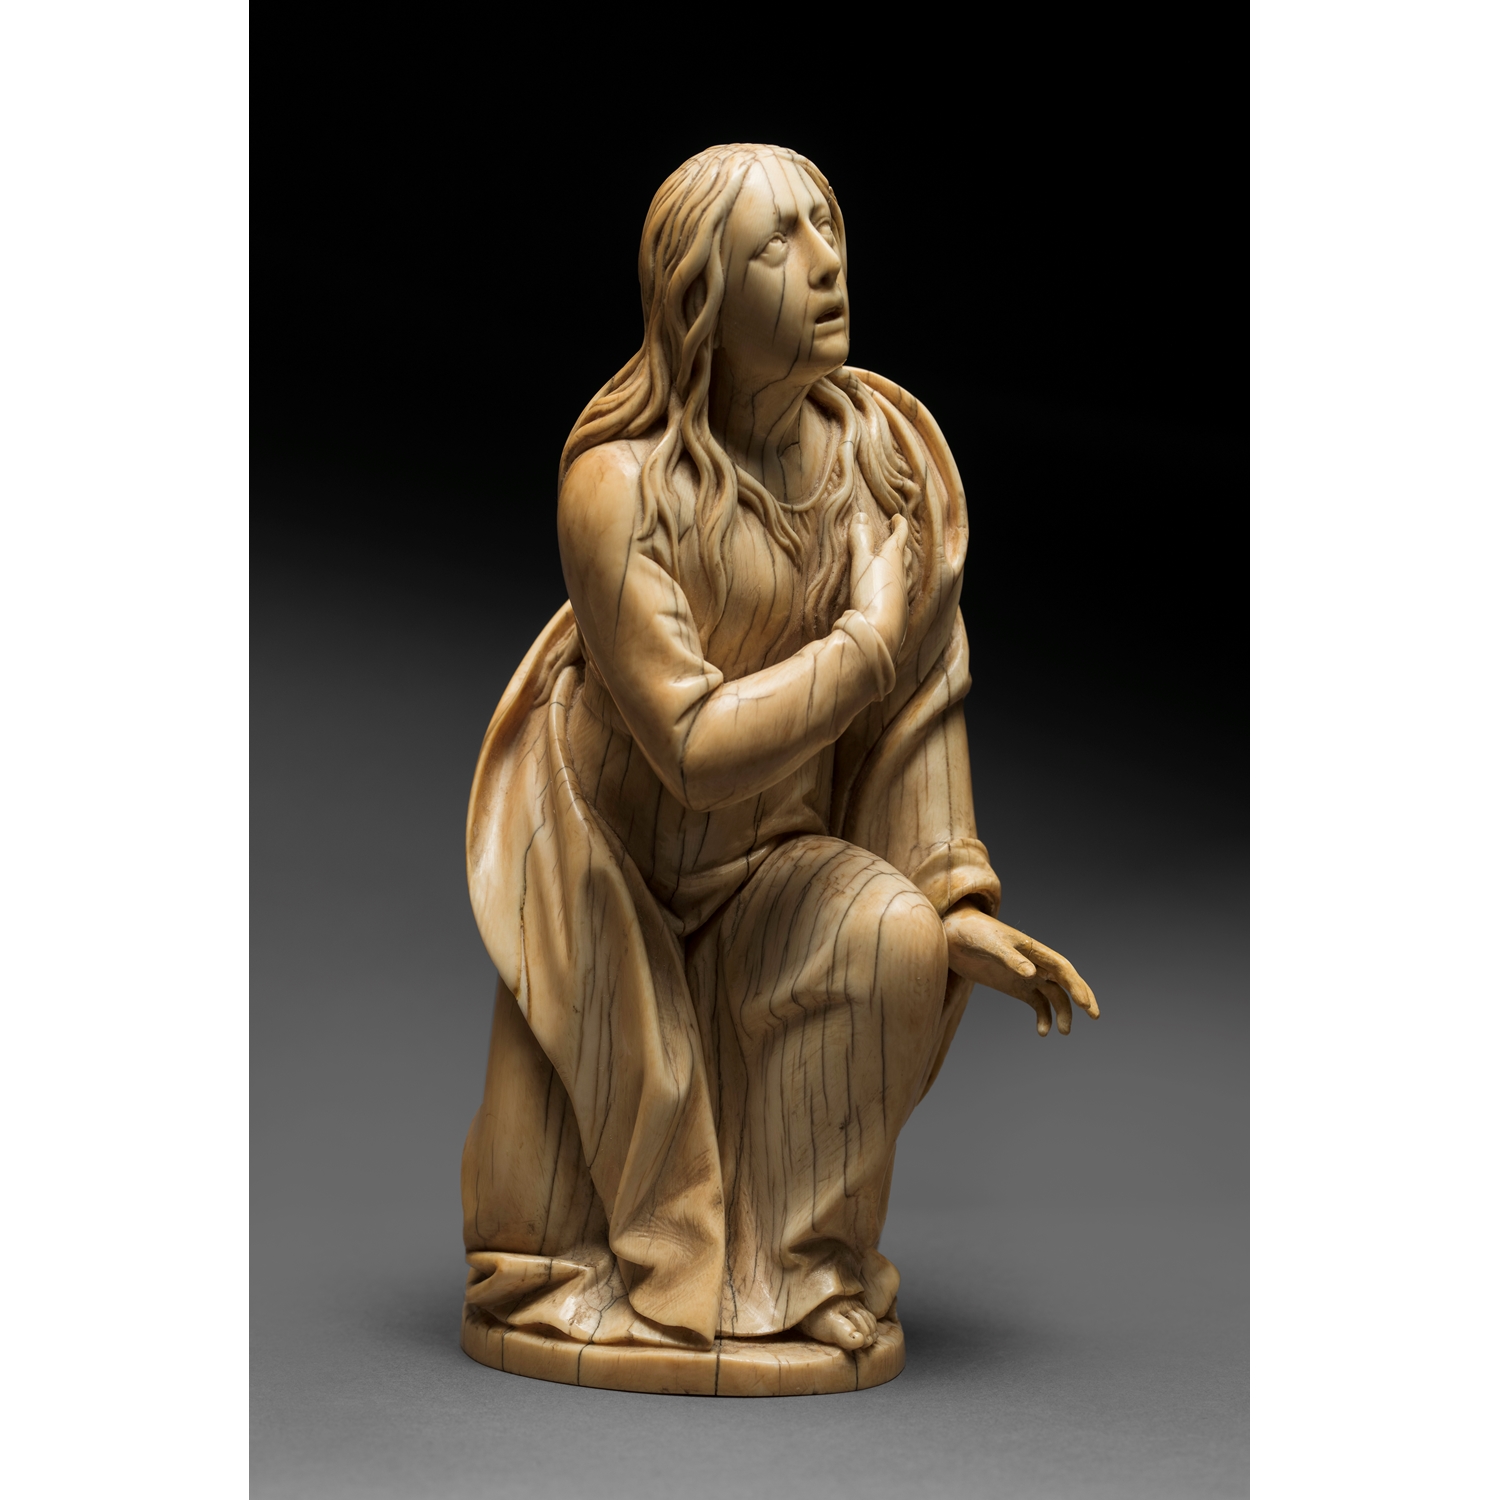 IMPORTANT MARY MAGDALENA FRANCE SECOND HALF OF THE 17TH CENTURY